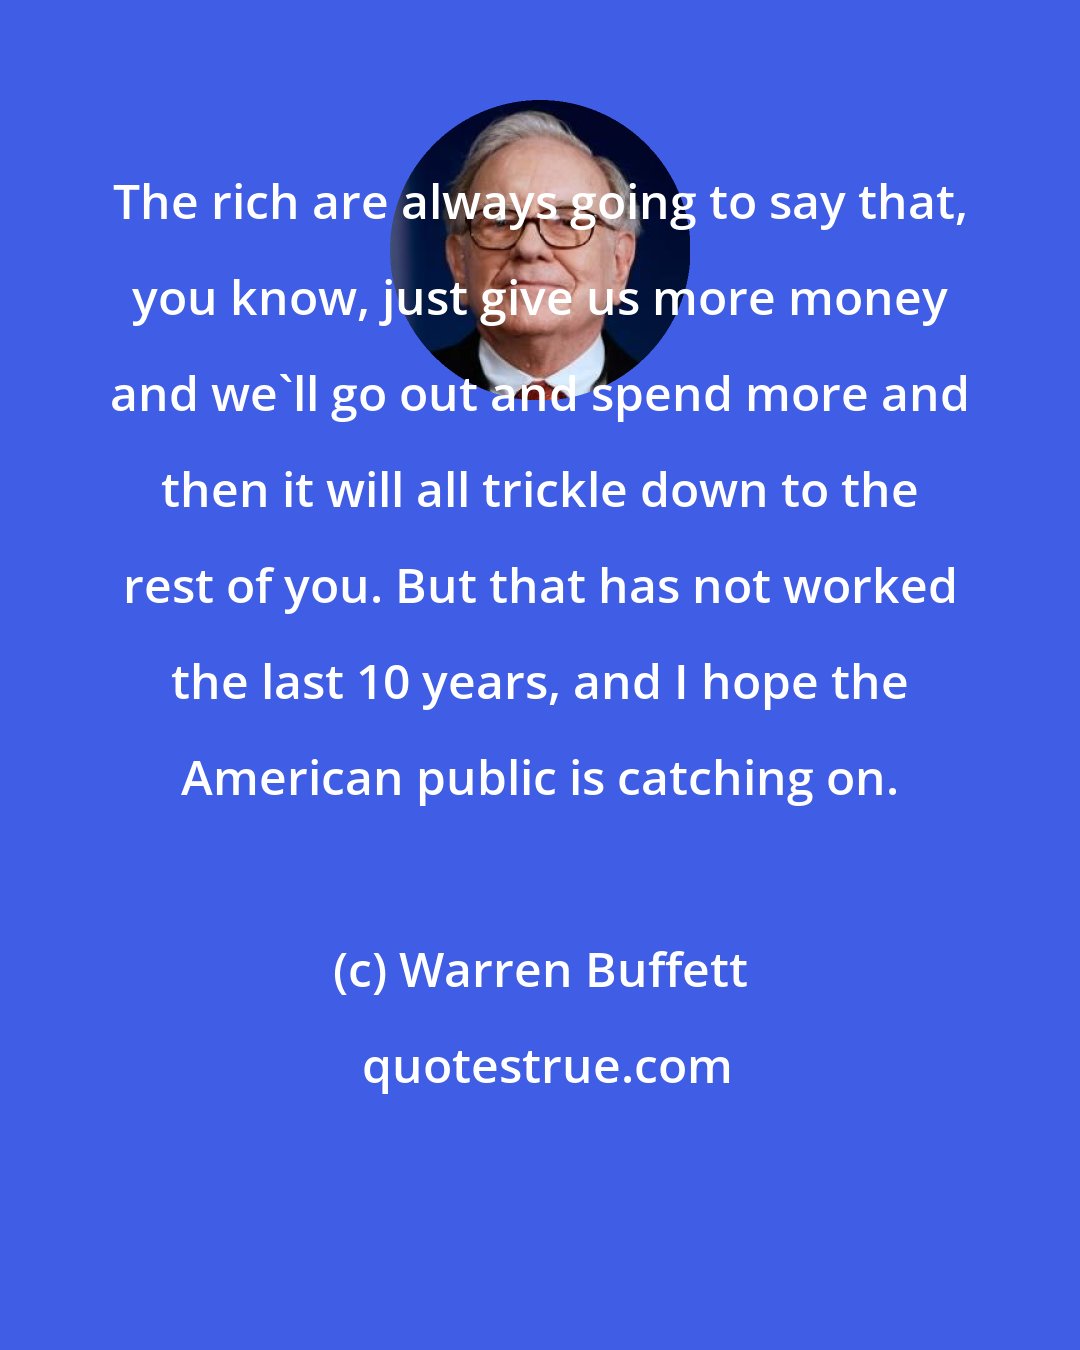 Warren Buffett: The rich are always going to say that, you know, just give us more money and we'll go out and spend more and then it will all trickle down to the rest of you. But that has not worked the last 10 years, and I hope the American public is catching on.